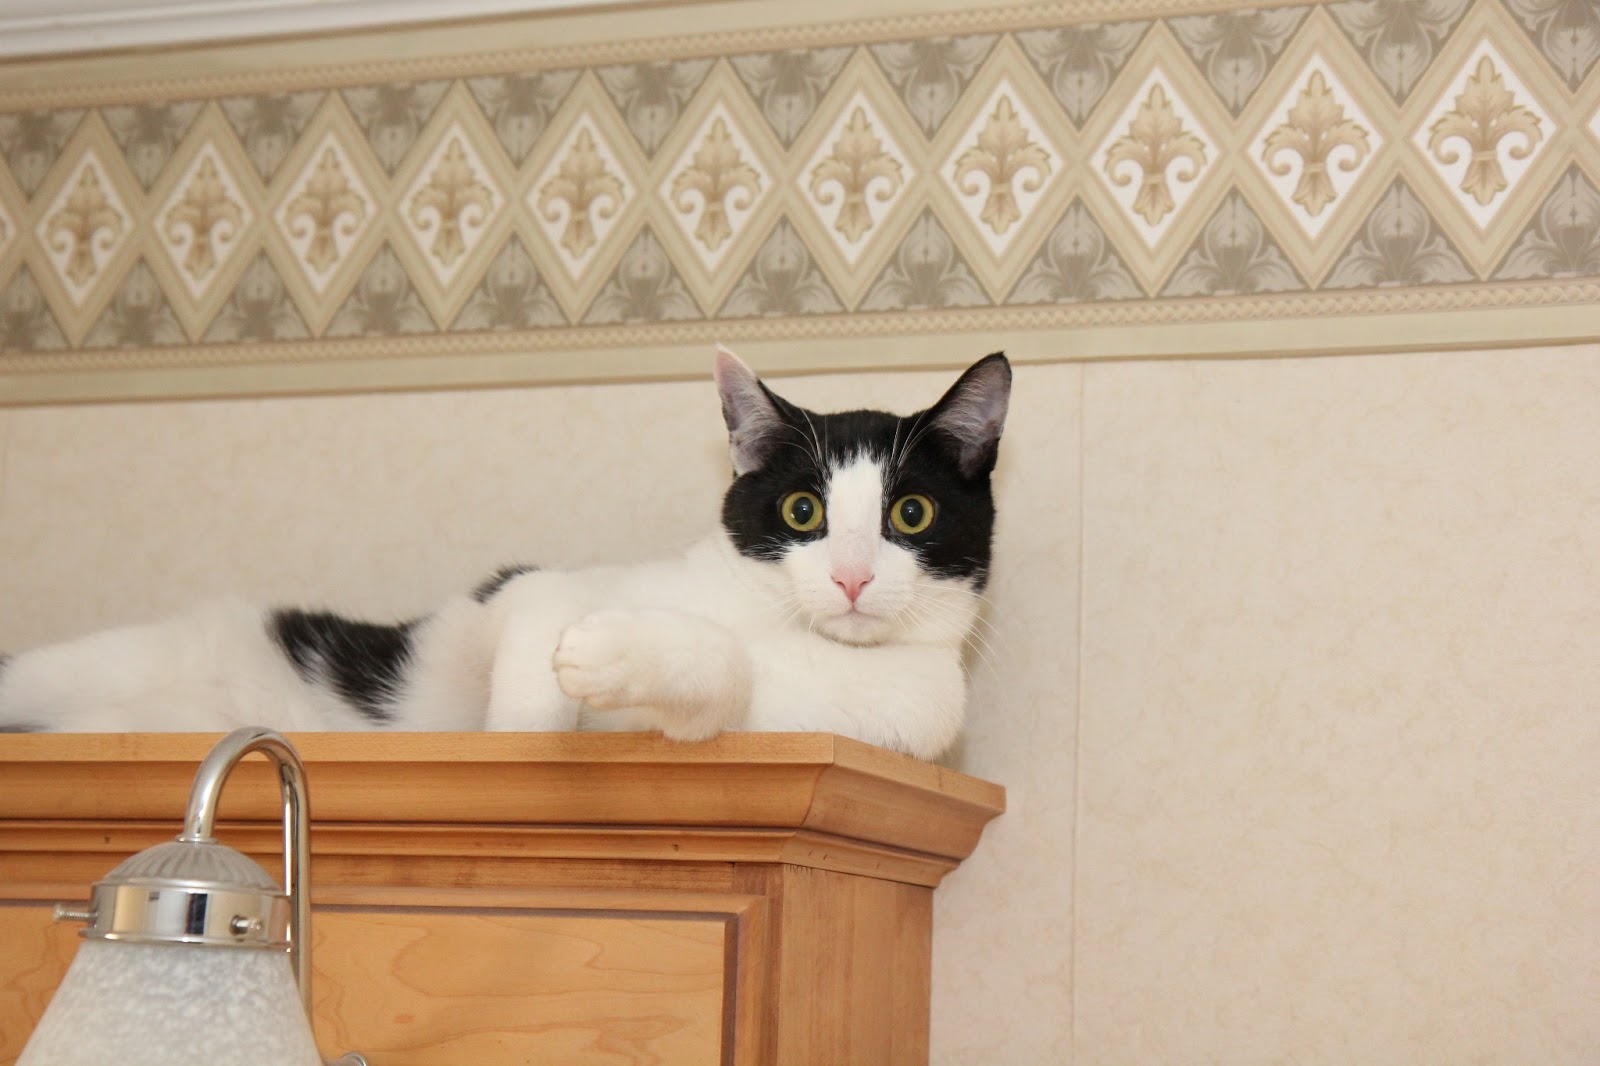 Cat relaxing on top of the medicine cabinet